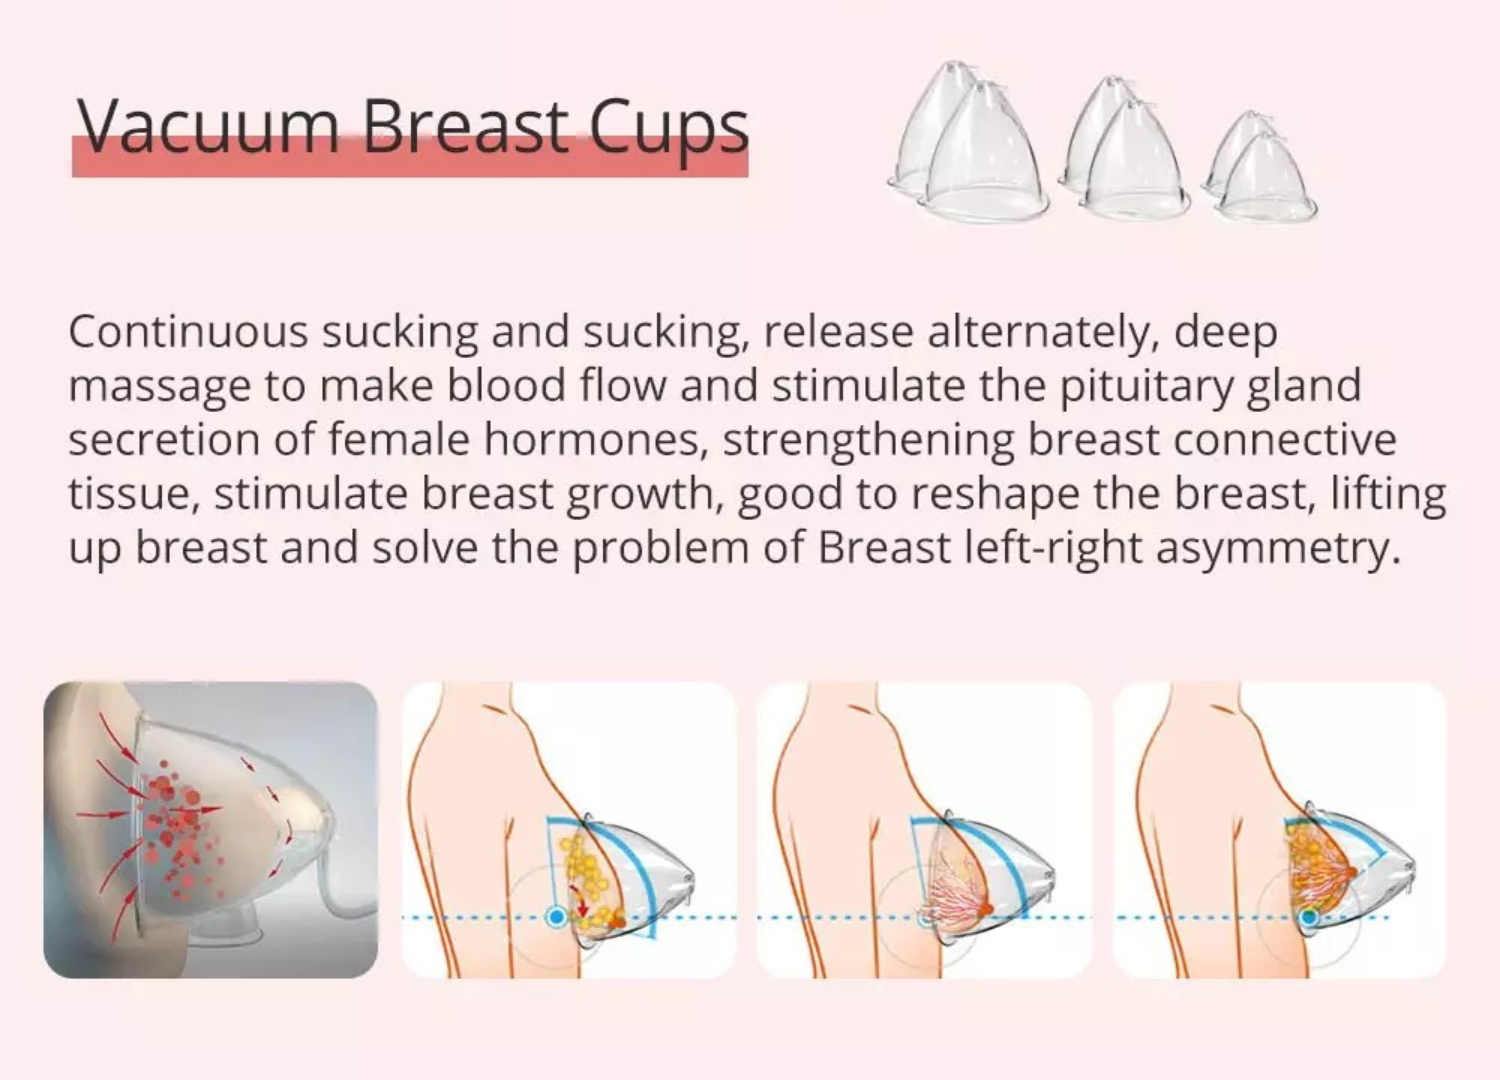 Vacuum Breast Cups, used on woman’s Chest with continuous sucking